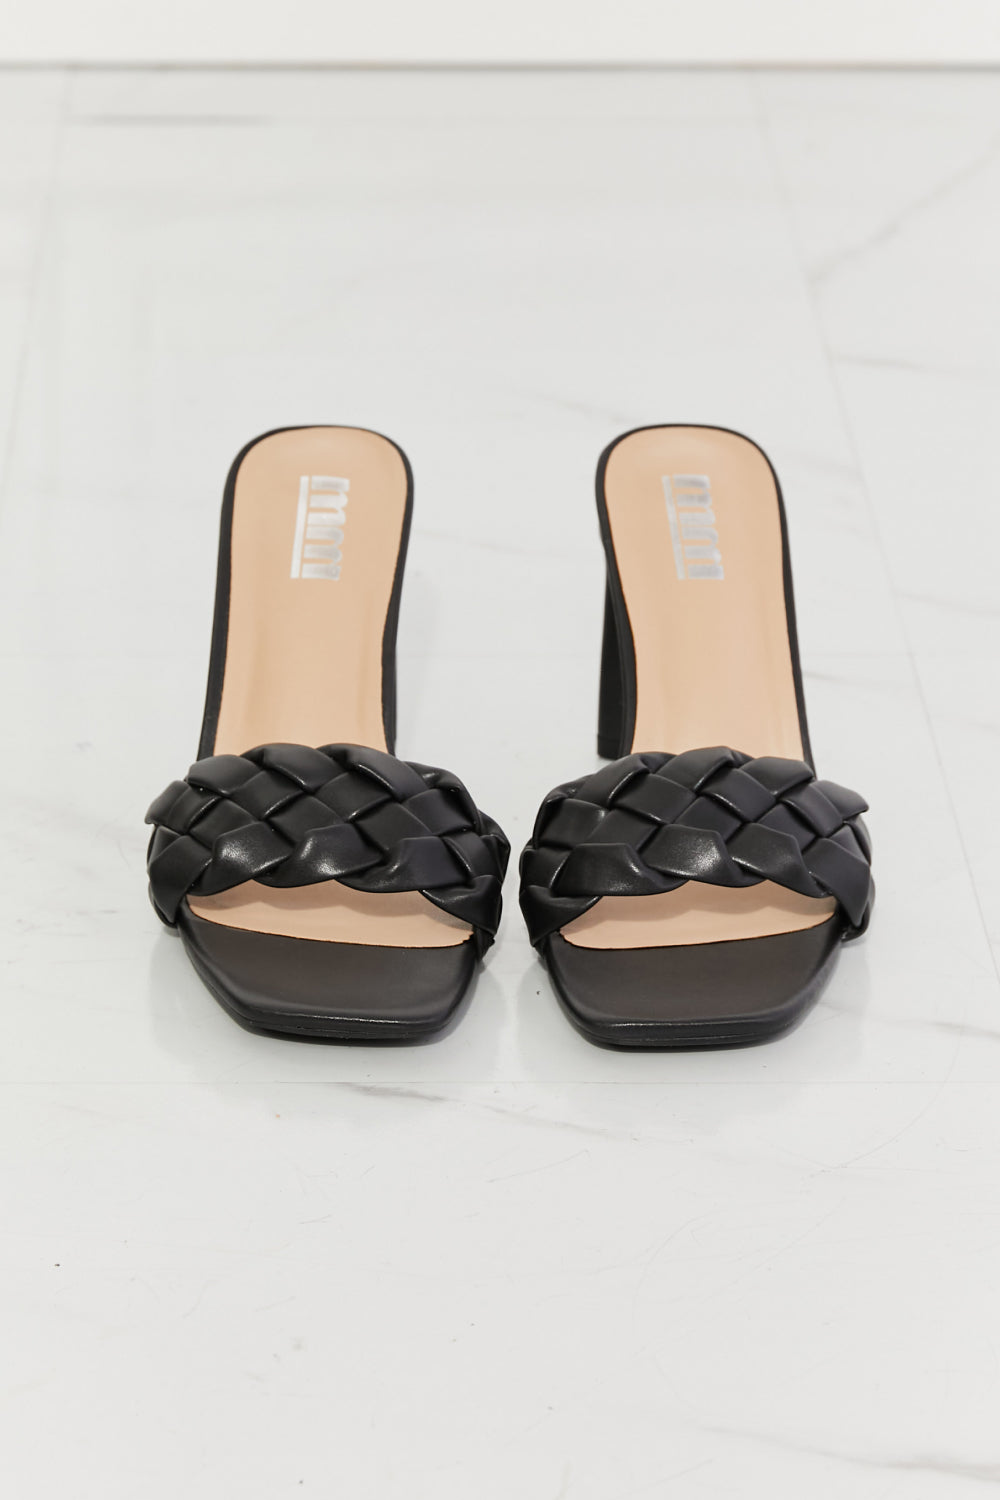 black sandals with braided strap and 4 inch heels